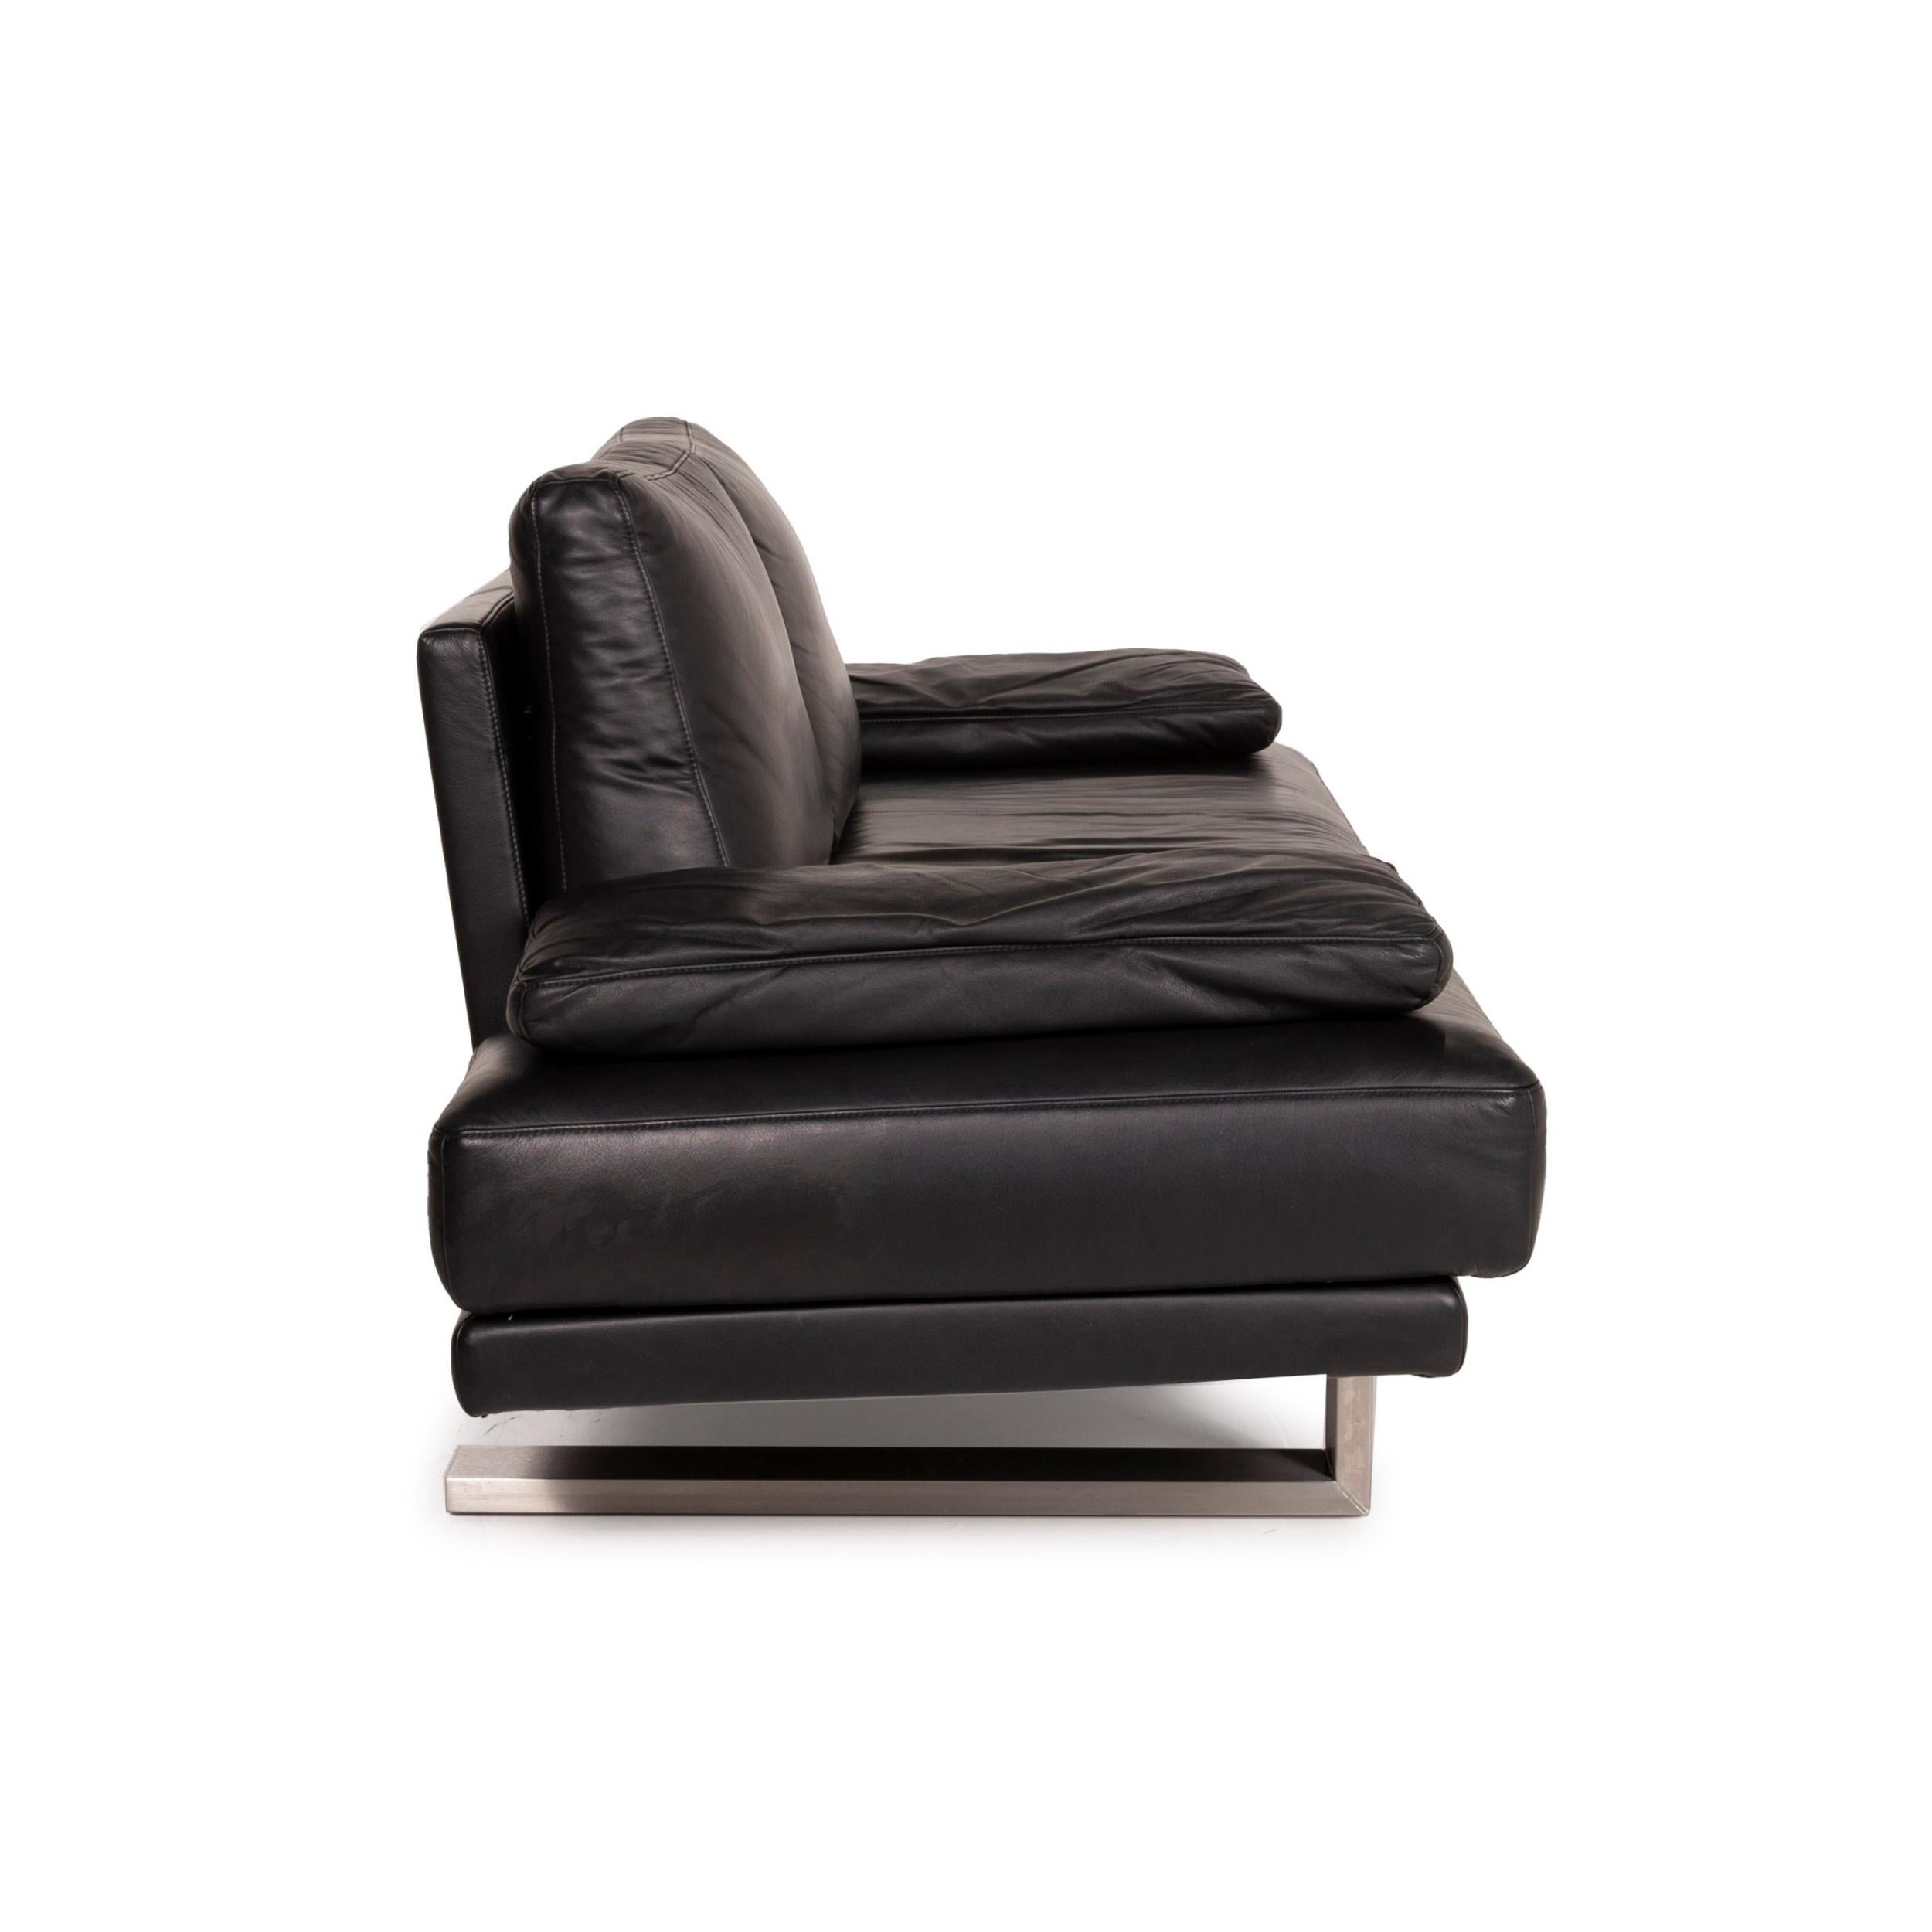 Rolf Benz 6600 Leather Sofa Black Two-Seater 3